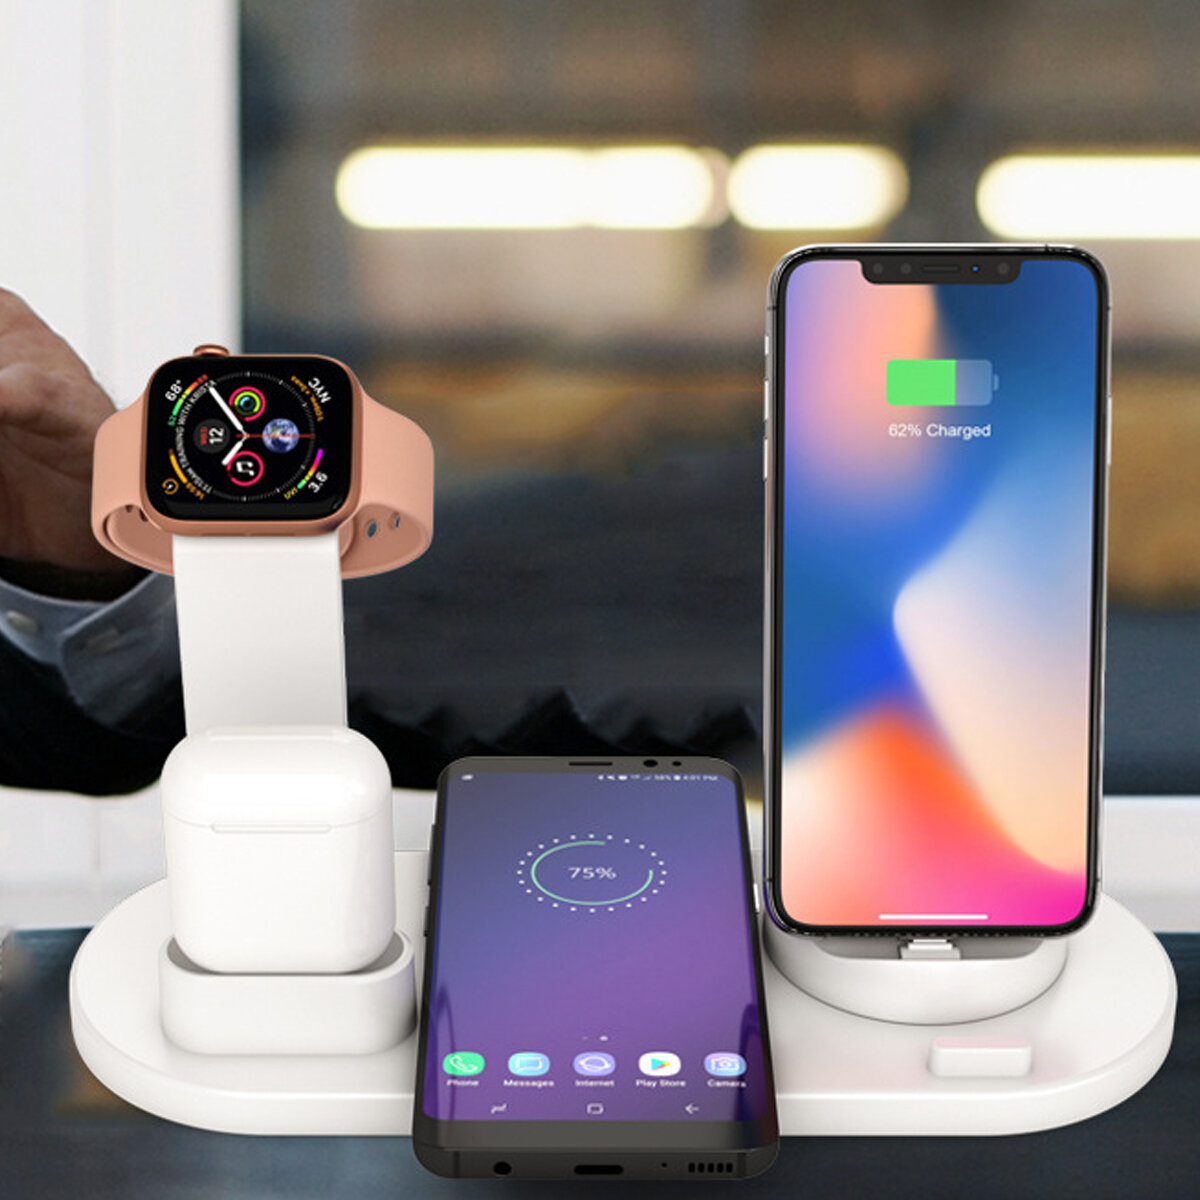 Bakeey 4 in 110Wワイヤレス充電器スタンドforAirpods Pro for Apple Watch for Samsung Galaxy S21 Note S20 ultra Huawei Mate40 P50 OnePlus 9 Pro for iPhone 12 Pro Max